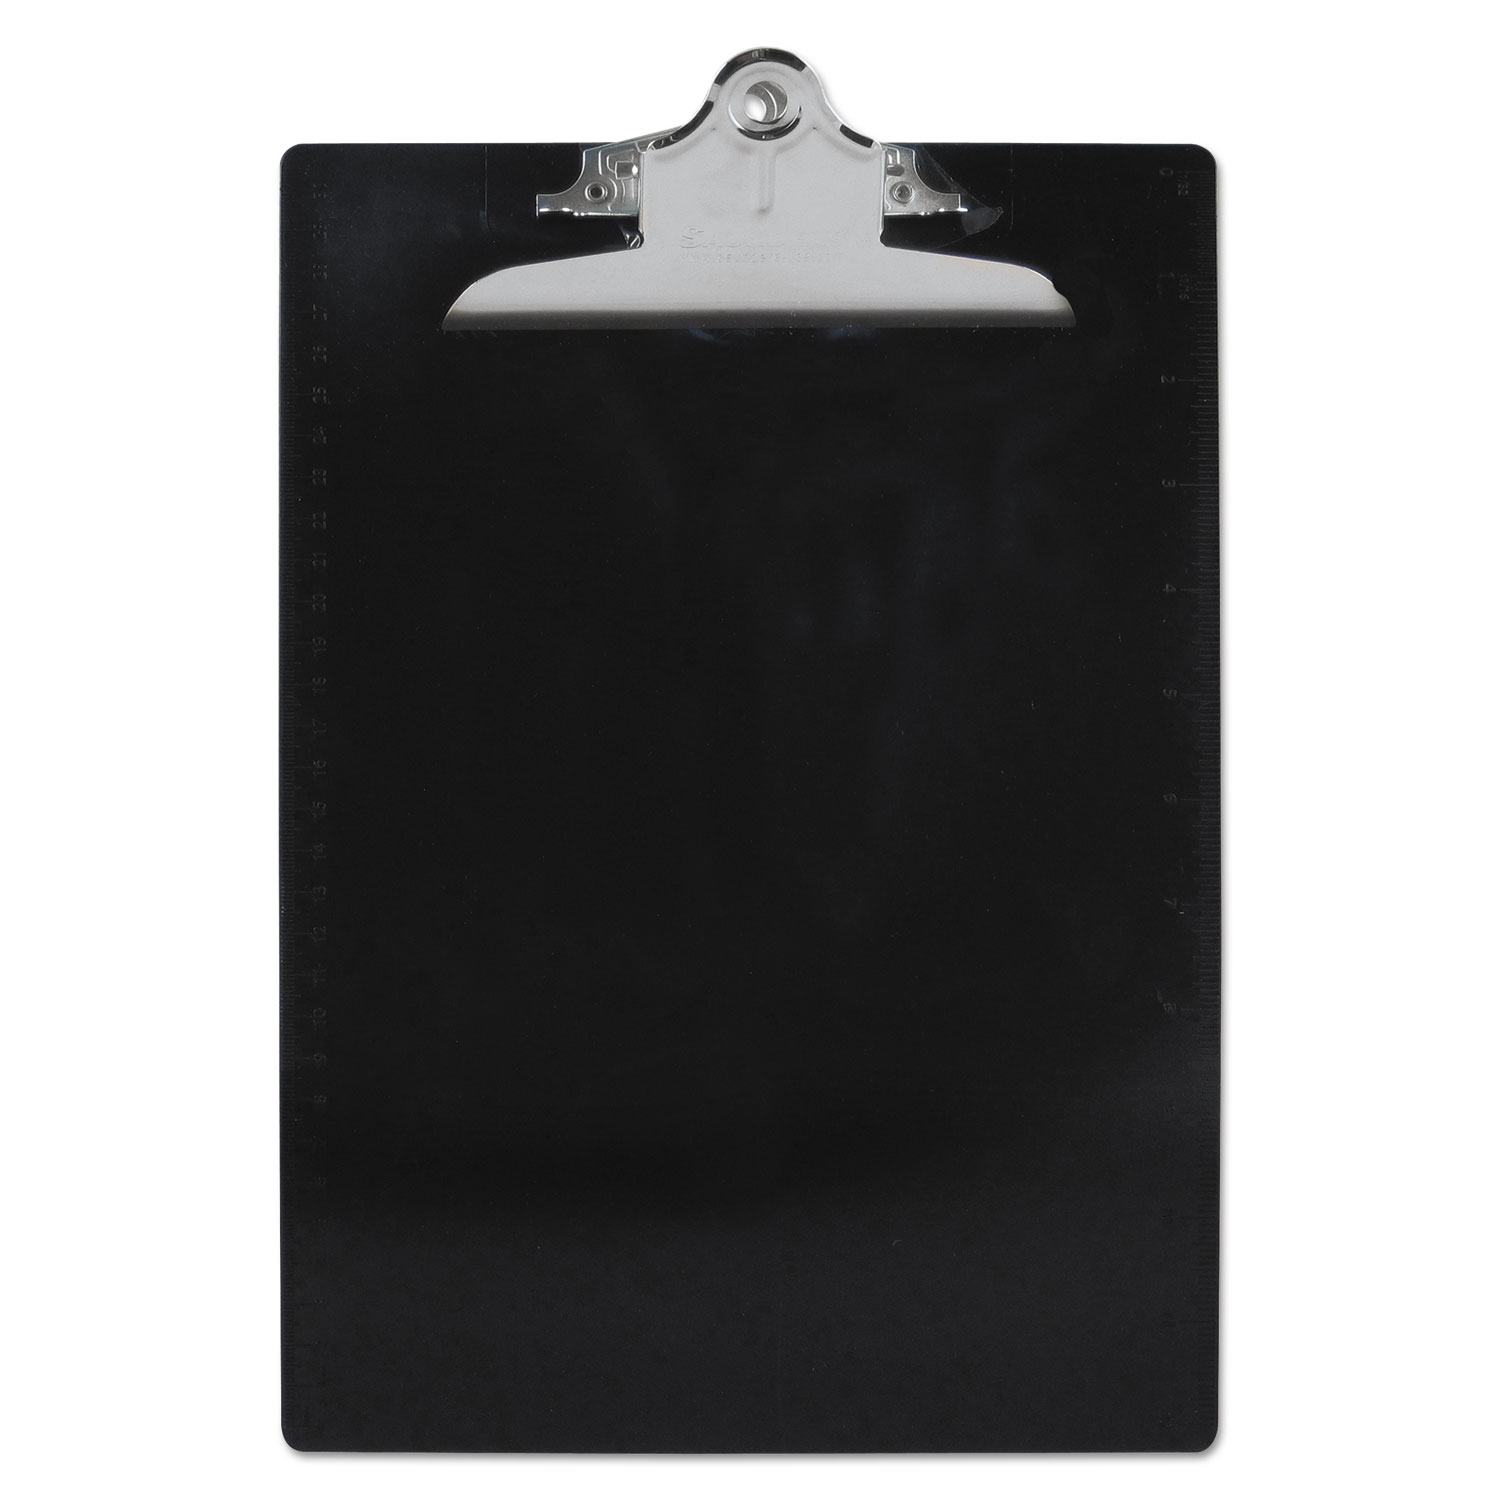  Saunders 21603 Recycled Plastic Clipboard with Ruler Edge, 1 Clip Cap, 8 1/2 x 12 Sheet, Black (SAU21603) 